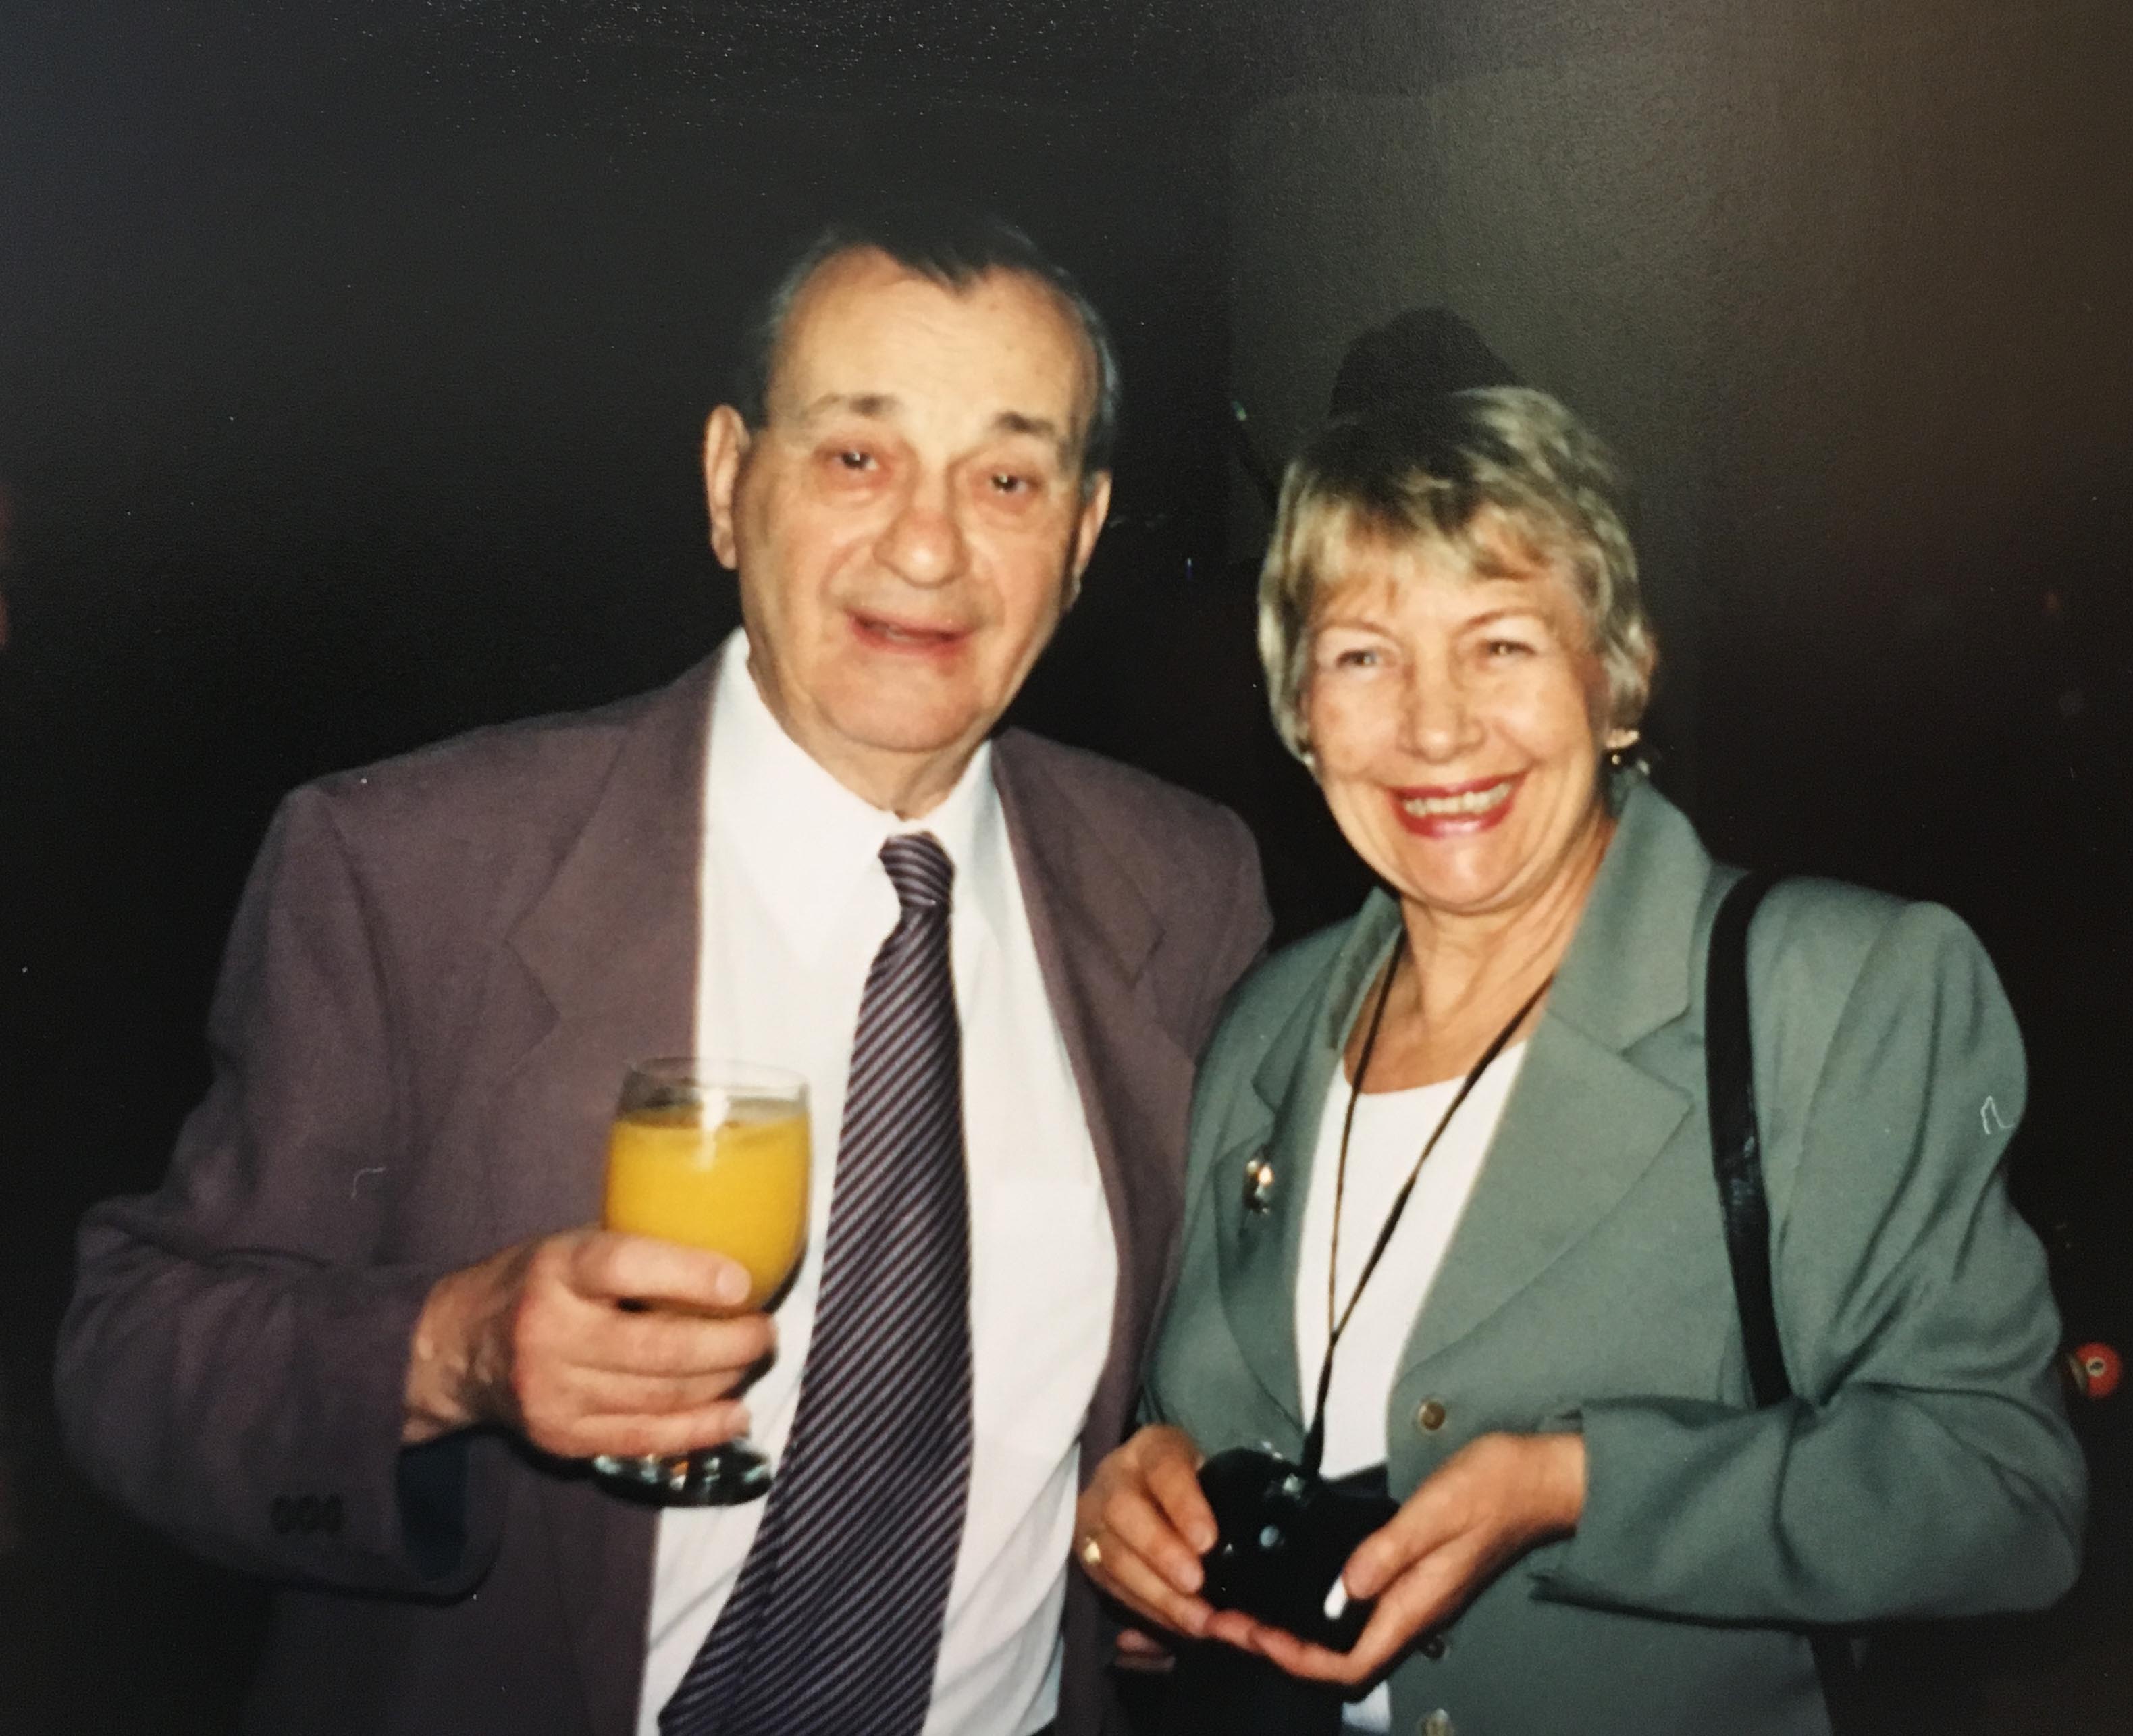 Emil Wolf and his wife, Marlies in 2001